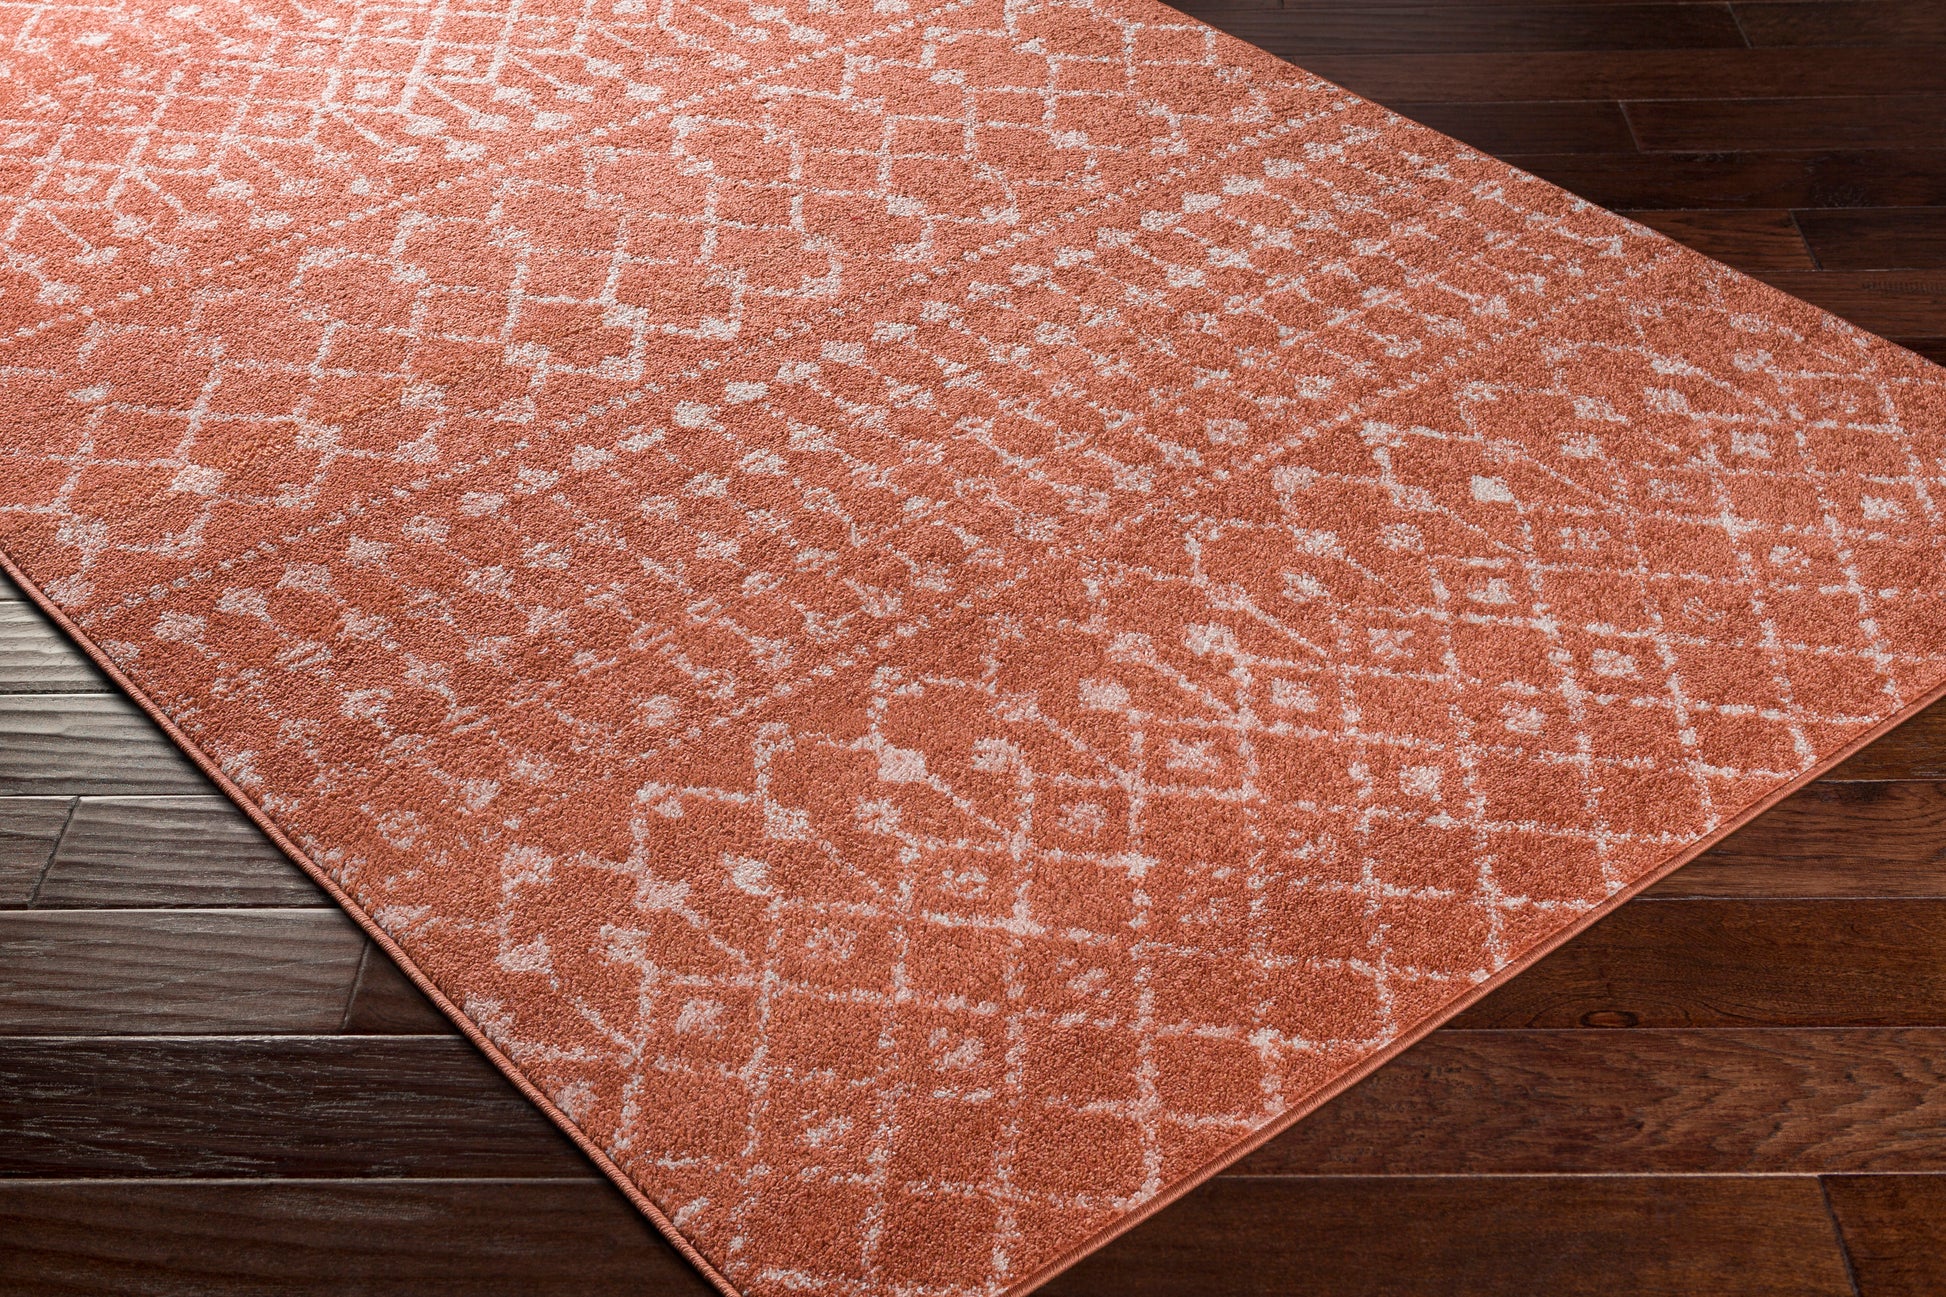 Surya Chester Che-2375 Brick Red, Dusty Coral Area Rug